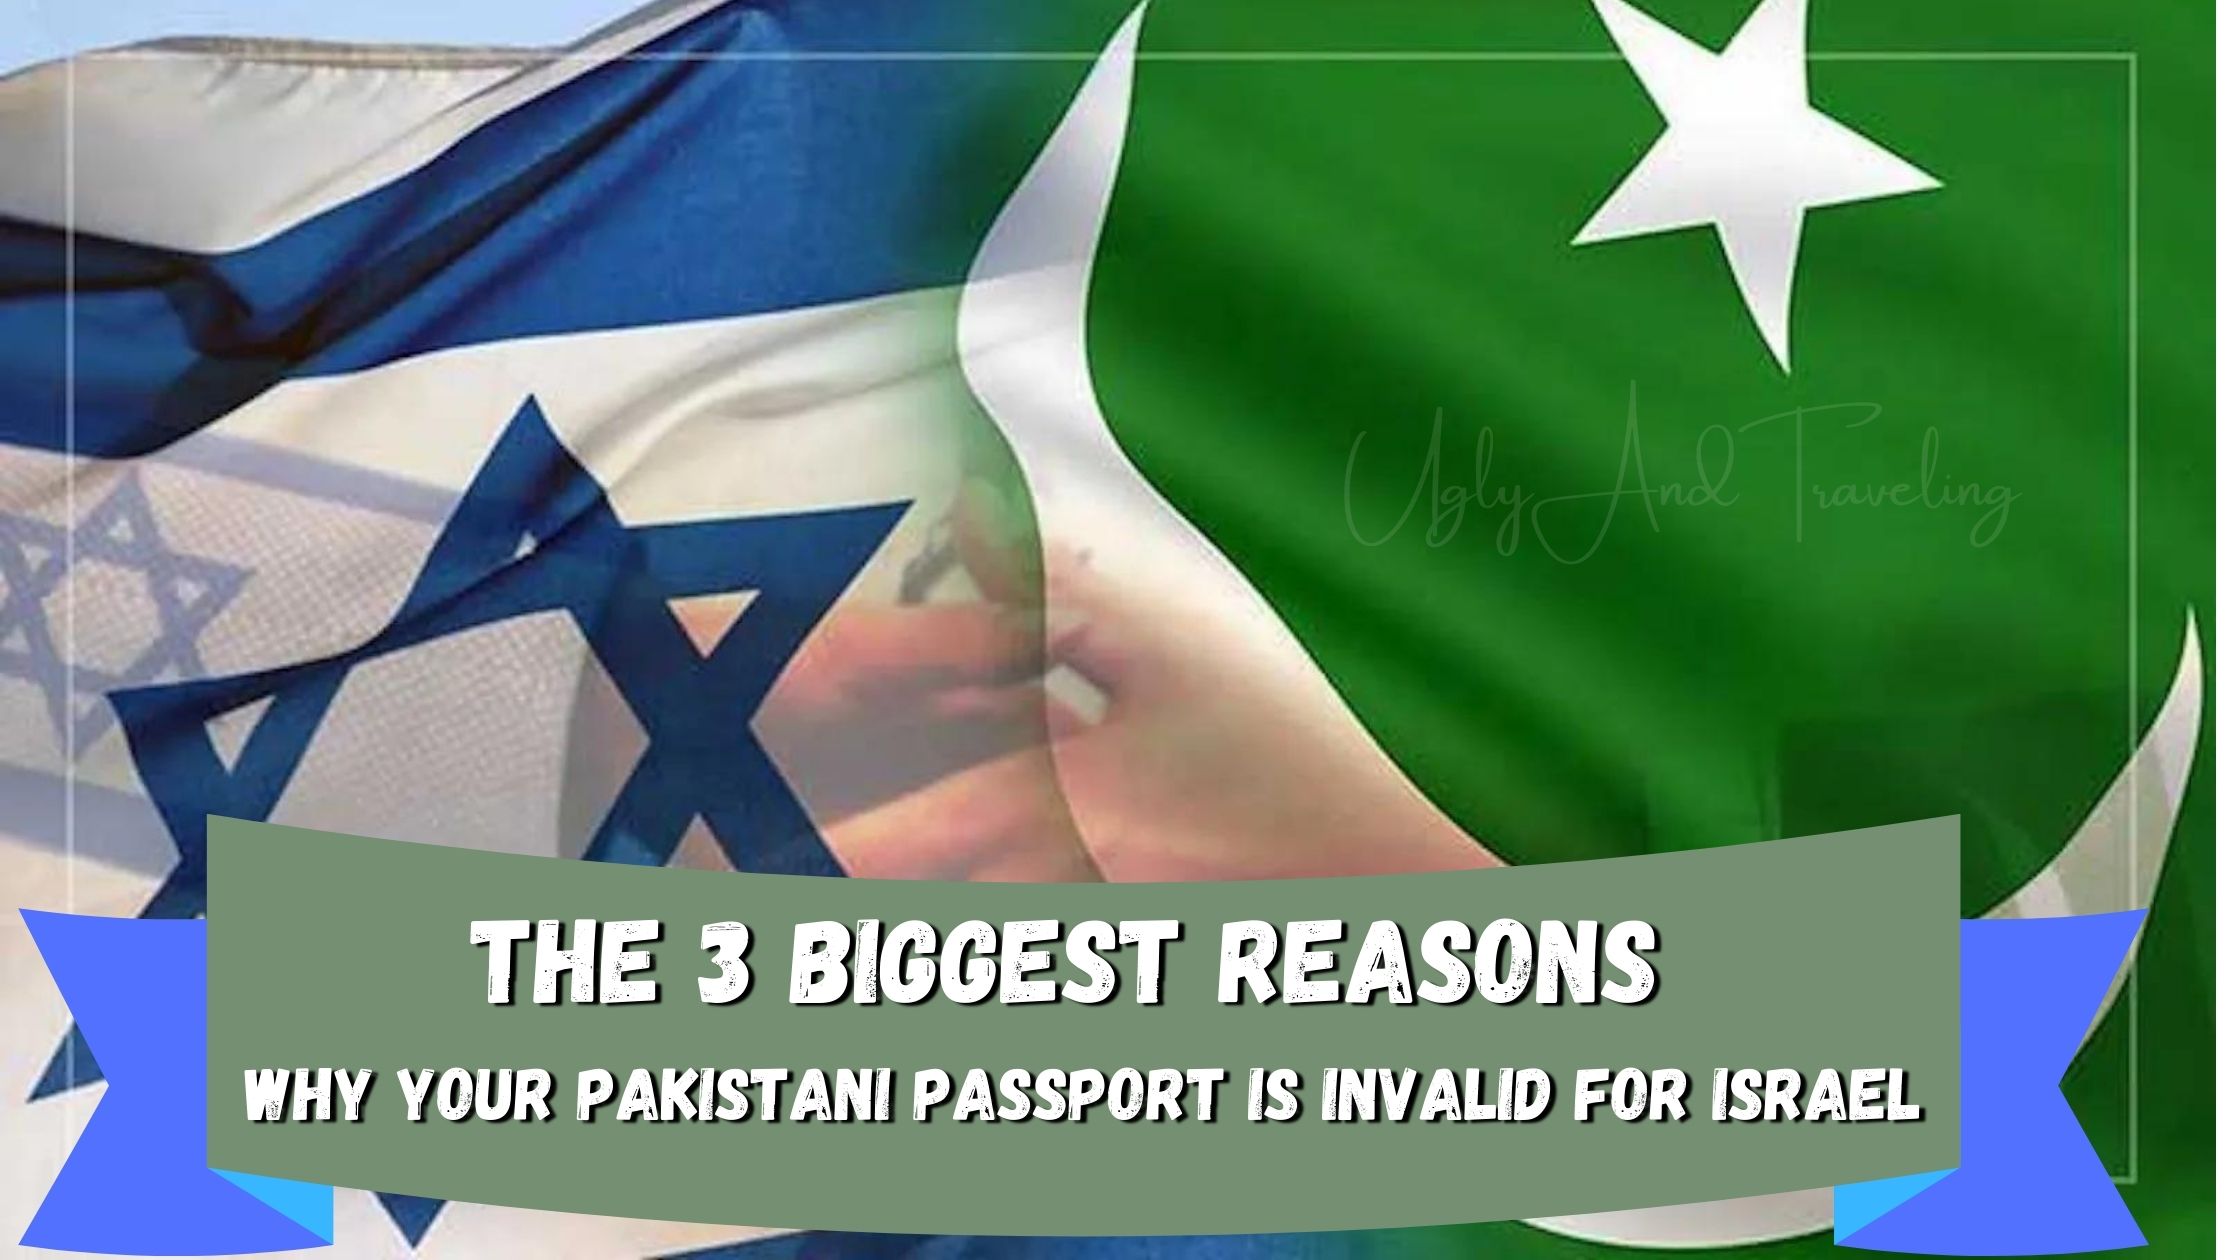 The 3 Biggest Reasons Why Your Pakistani Passport is Invalid for Israel